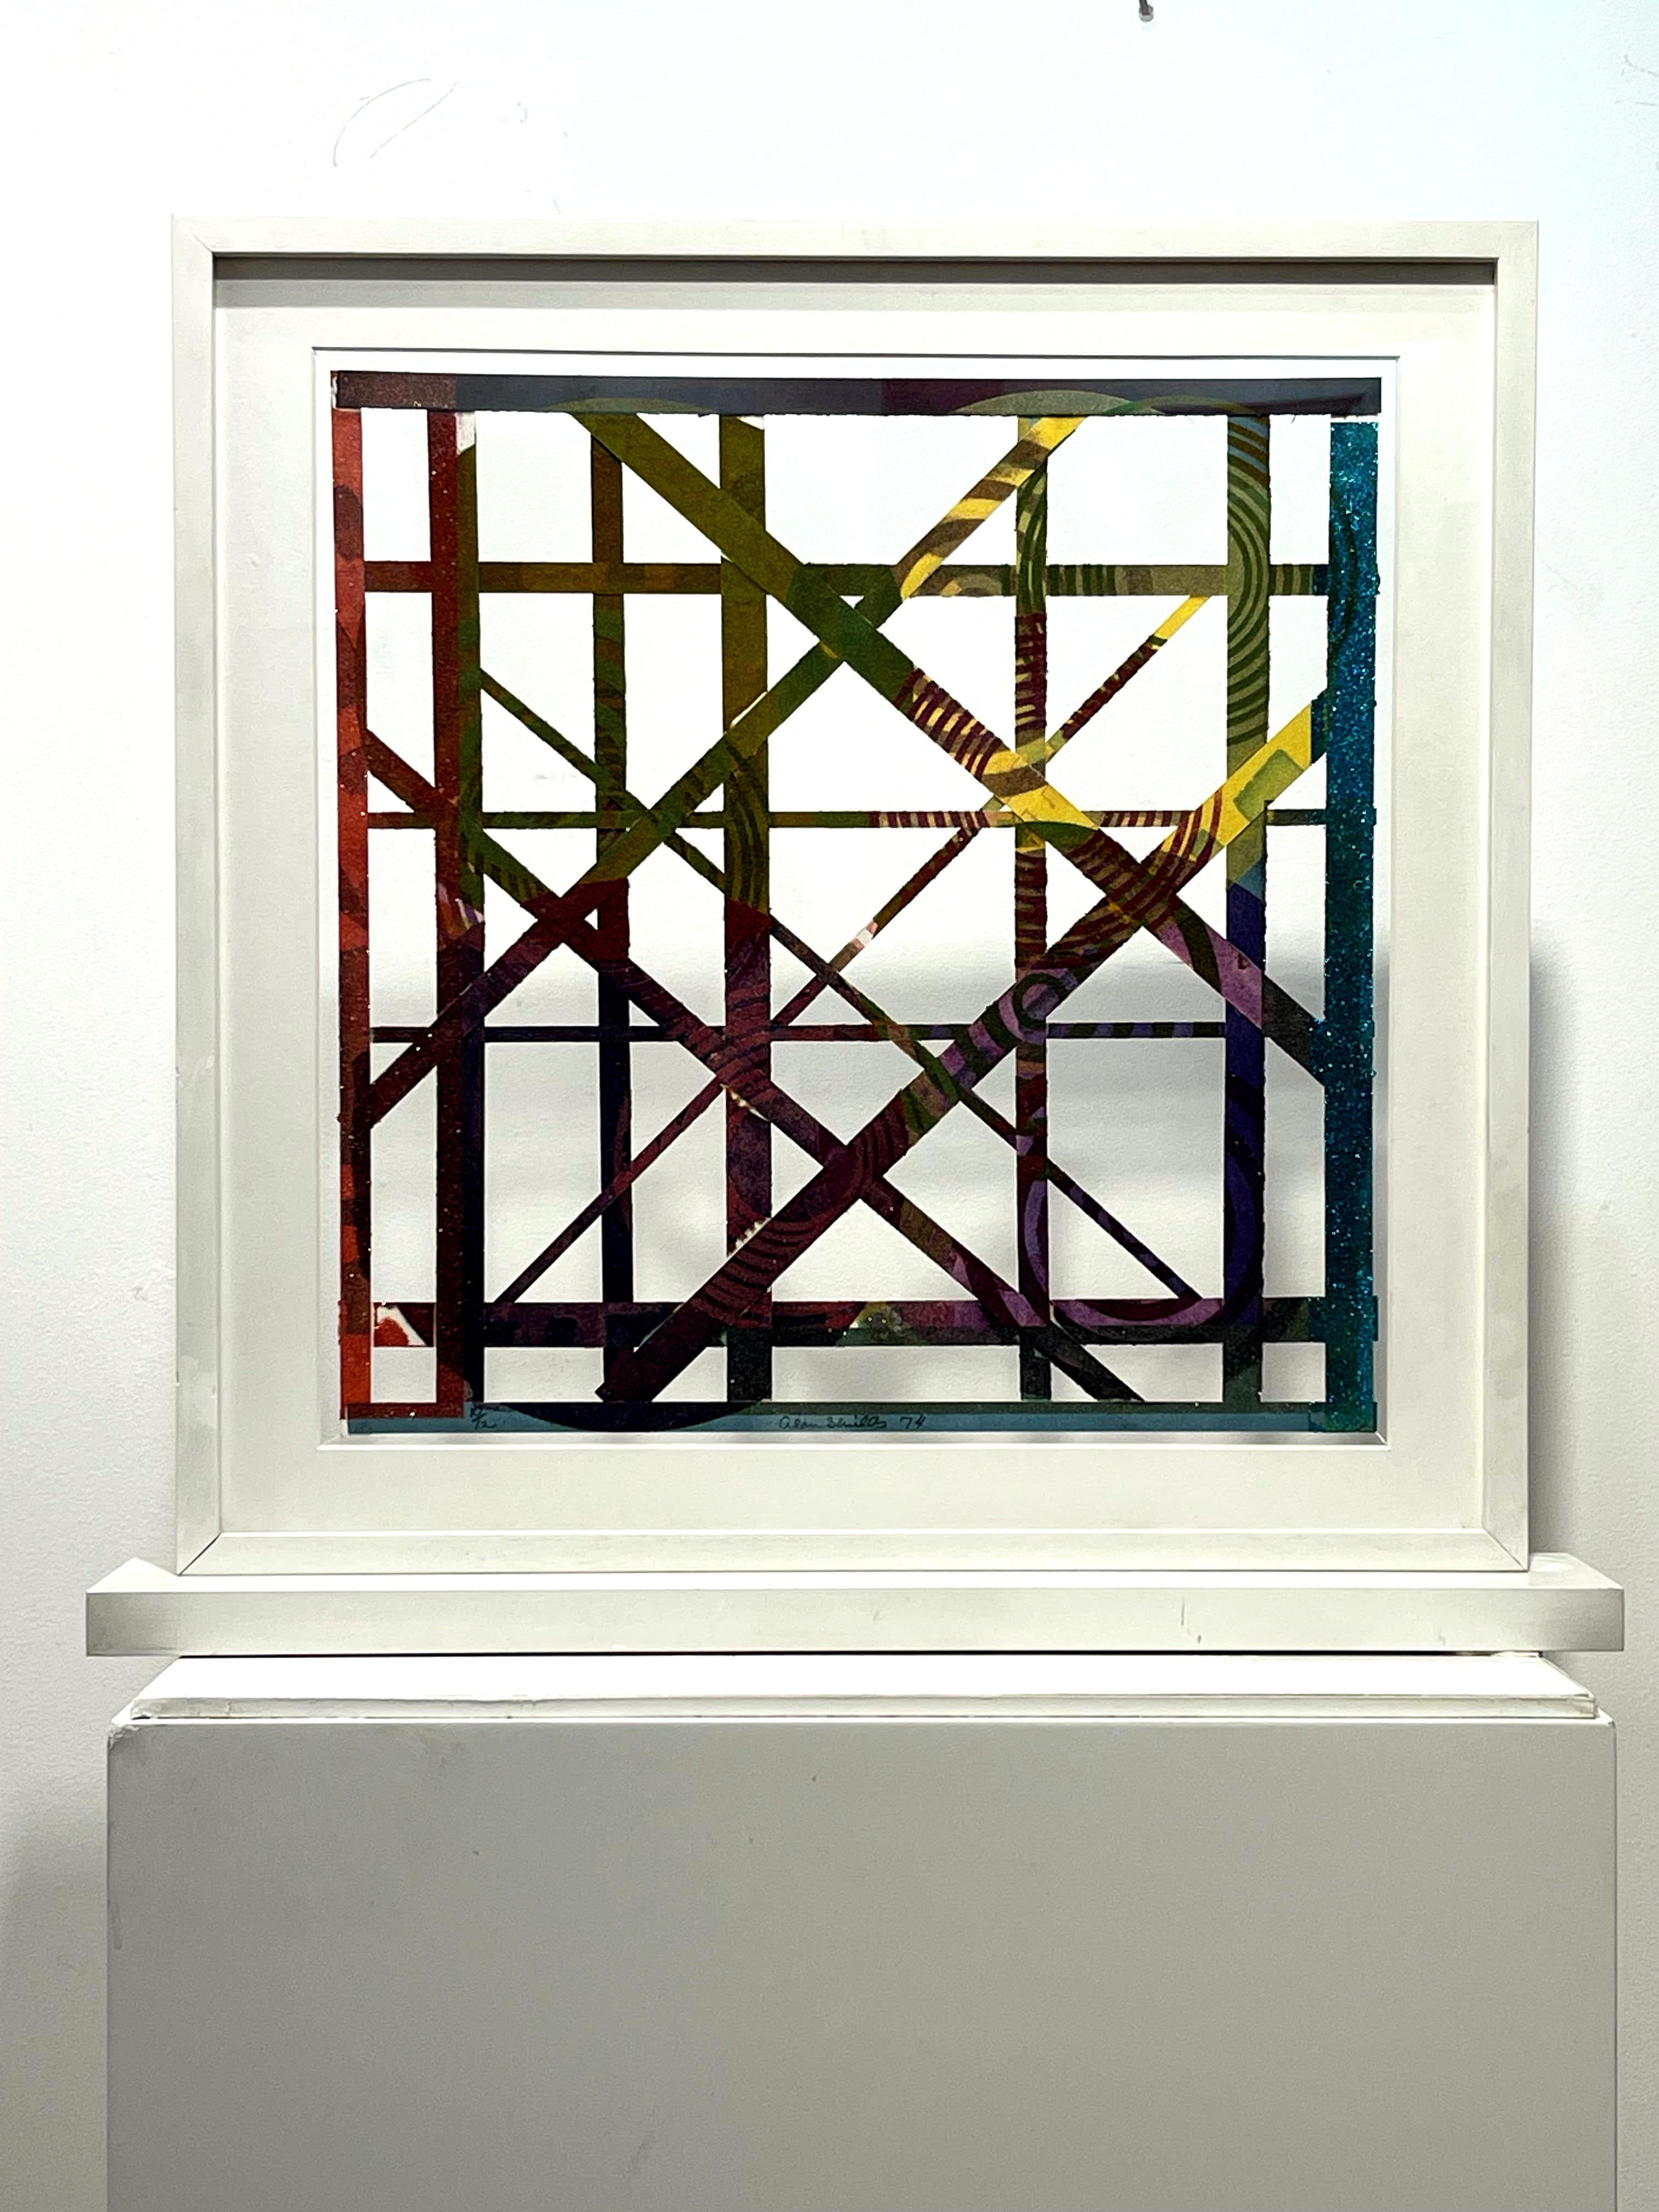 Untitled double sided mixed media work on bespoke 3-D standalone frame - Painting by Alan Shields